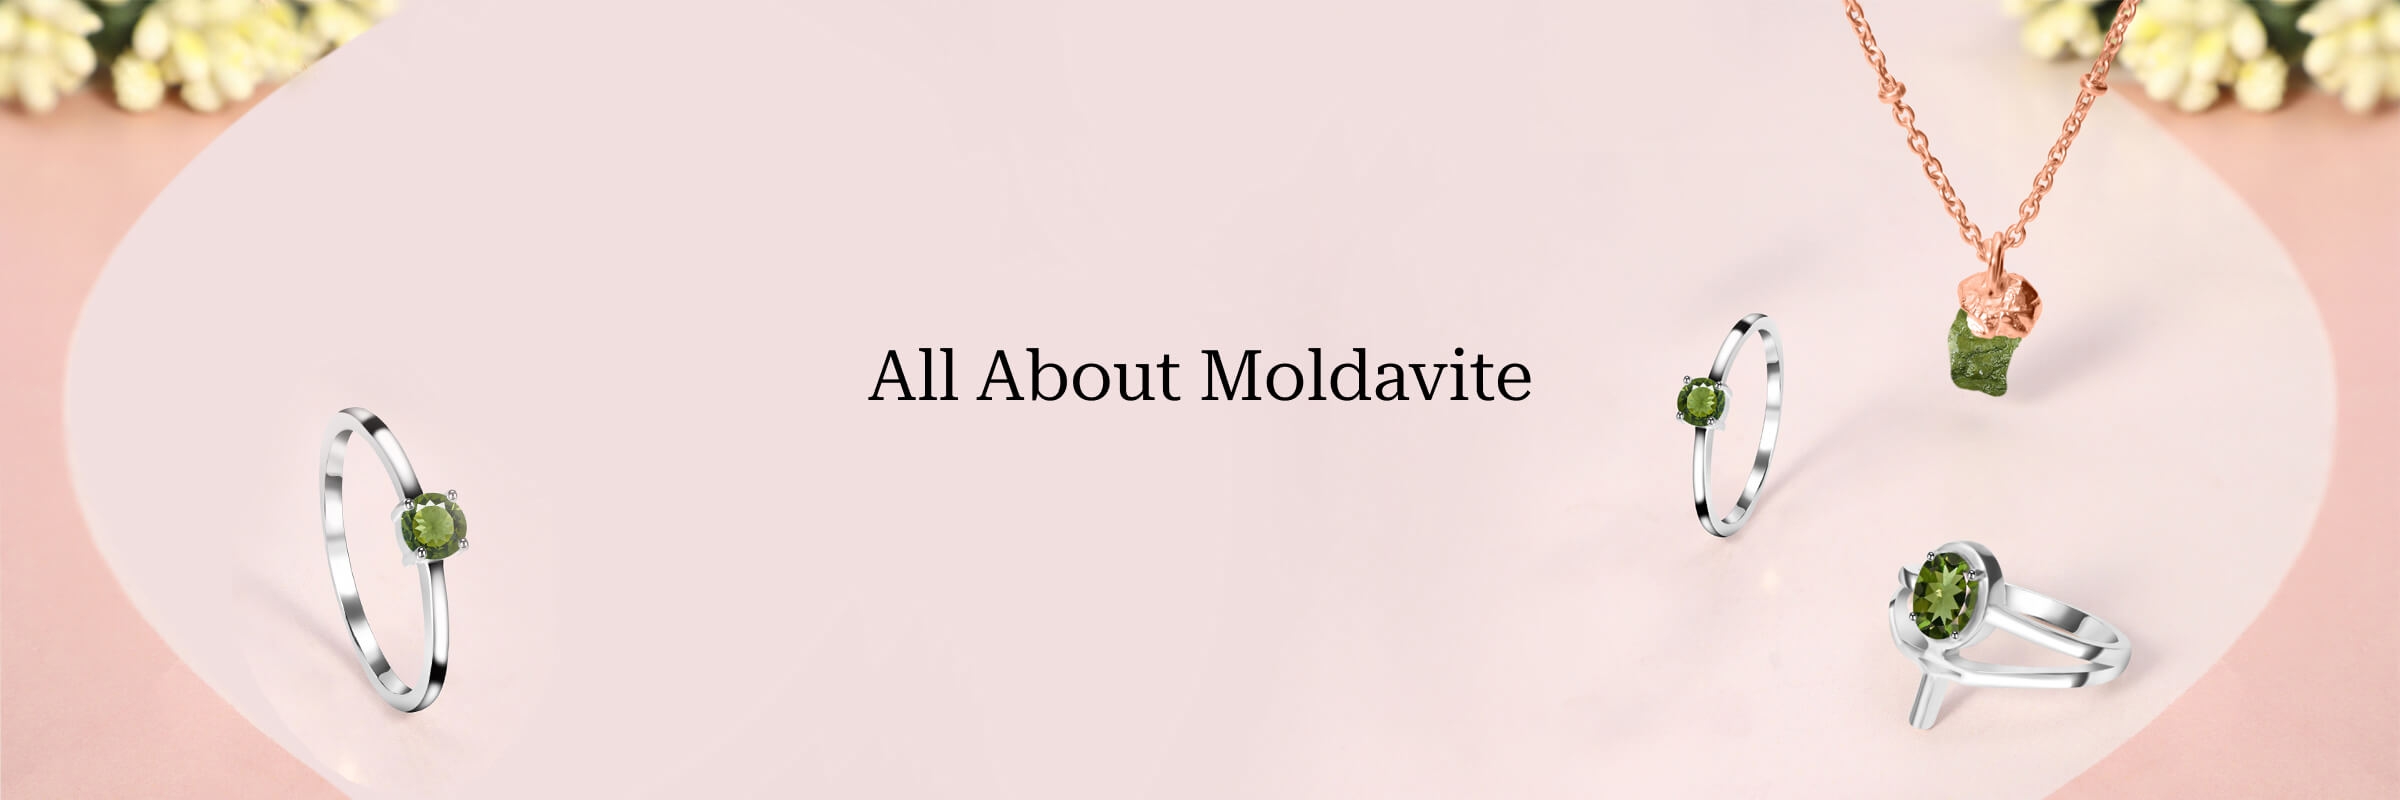 How to activate clean recharge your moldavite